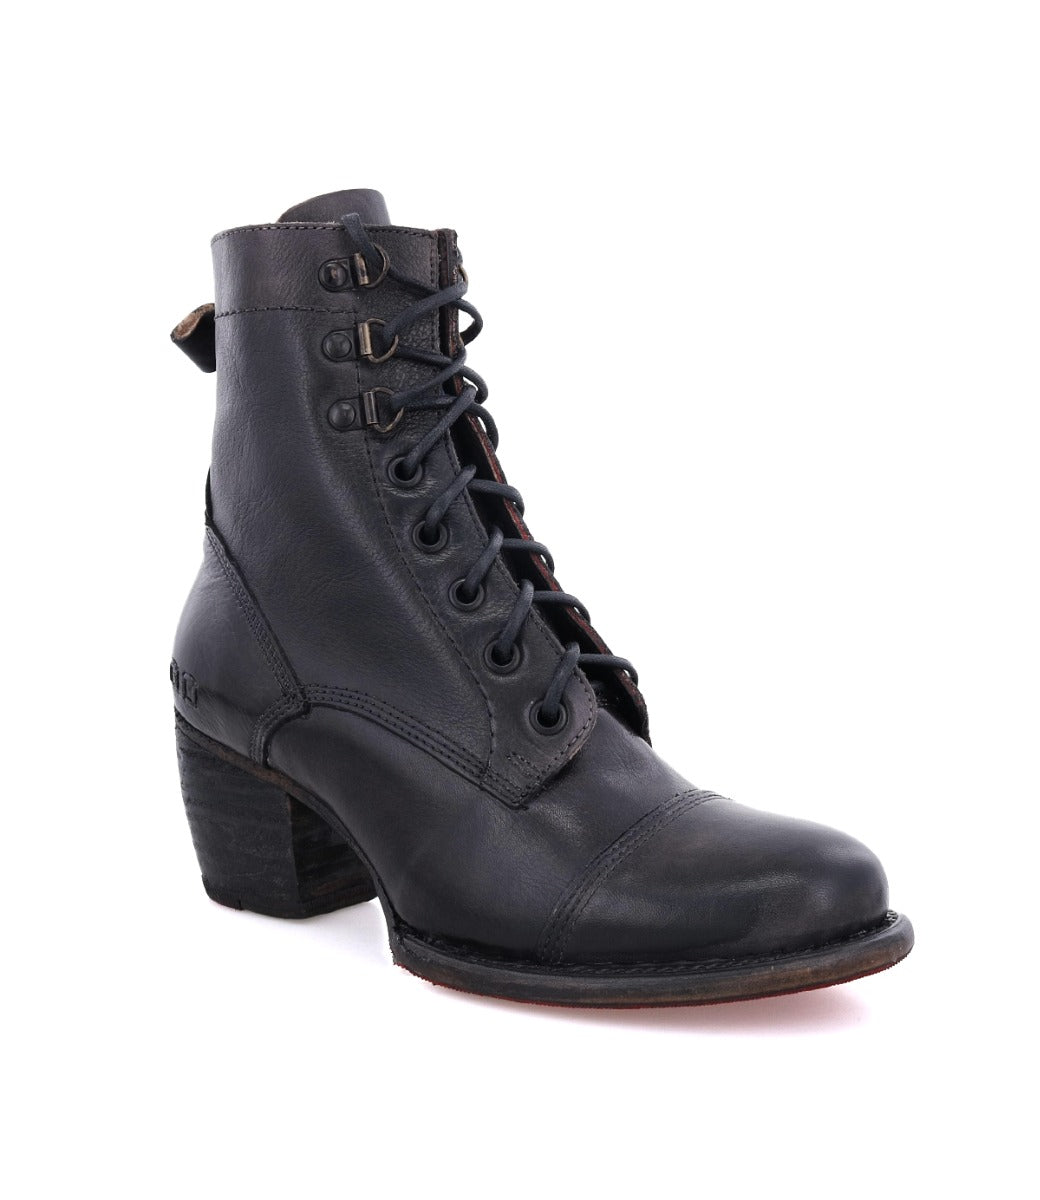 A women's black leather ankle boot called Judgement by Bed Stu.